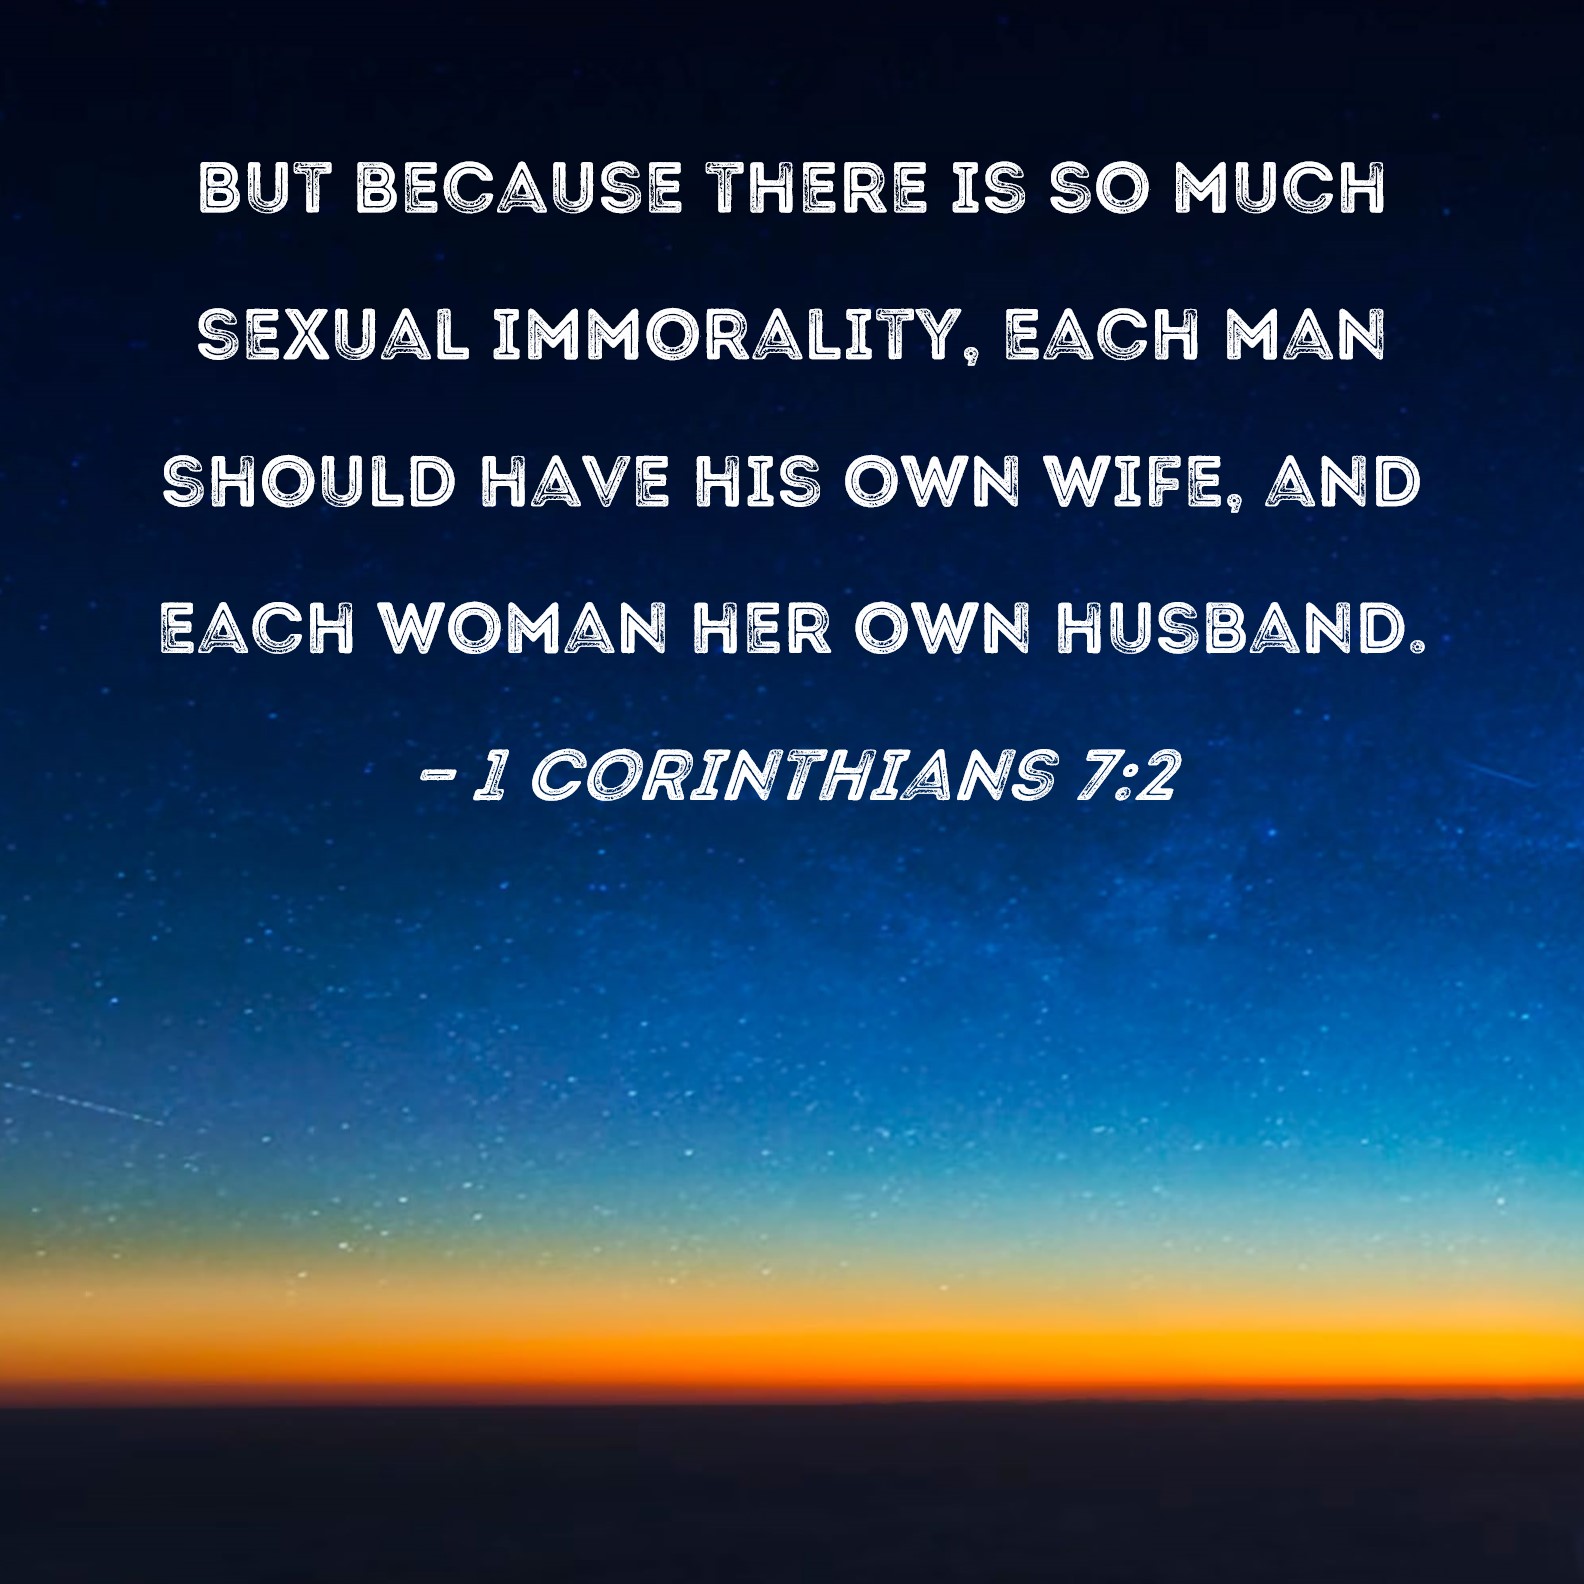 1 Corinthians 7:2 But because there is so much sexual immorality, each man  should have his own wife, and each woman her own husband.